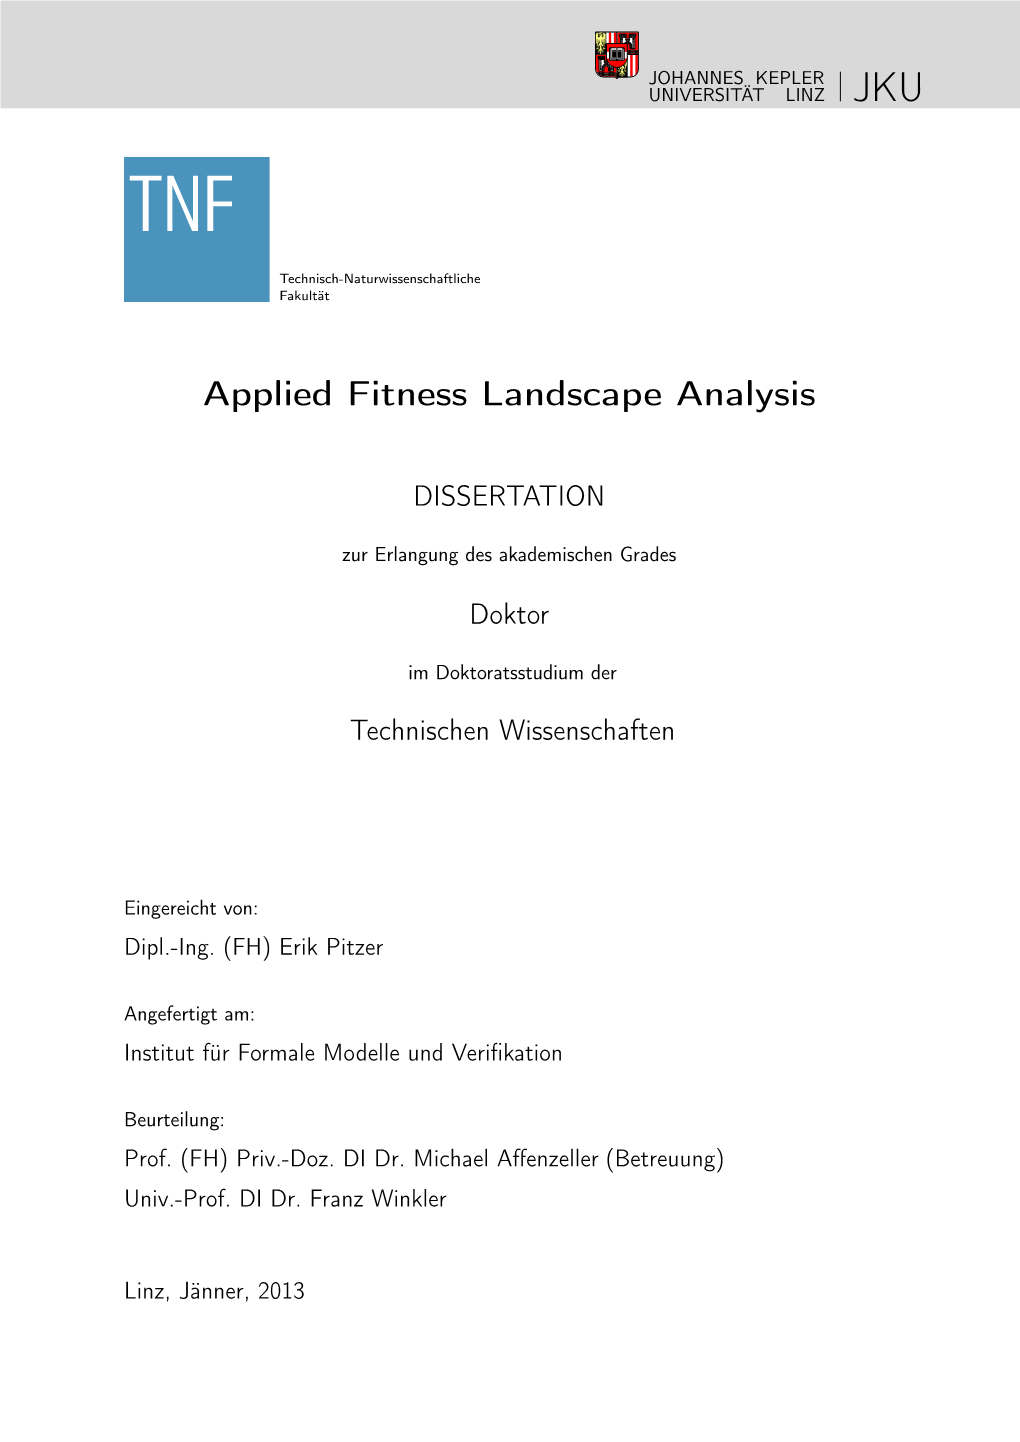 Applied Fitness Landscape Analysis